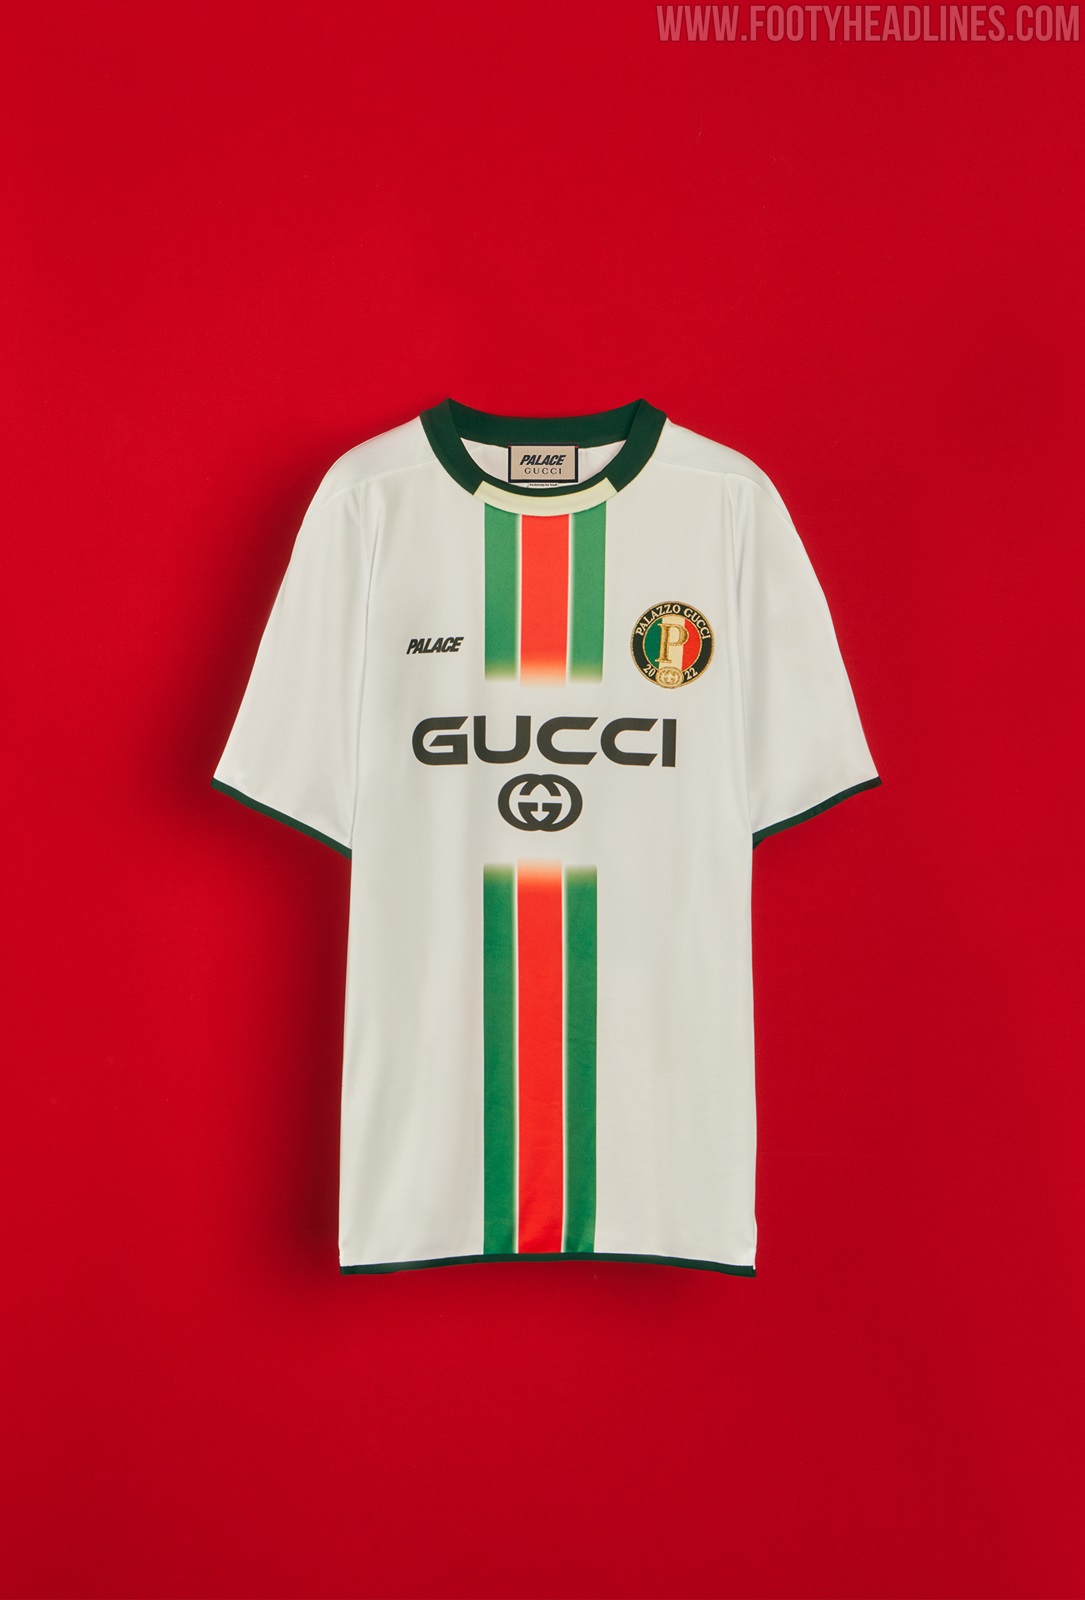 Det mørk smør 3 Gucci x Palace Football Kits Released - Inspired By Chelsea, Italy &  Strawberry Kit - Footy Headlines